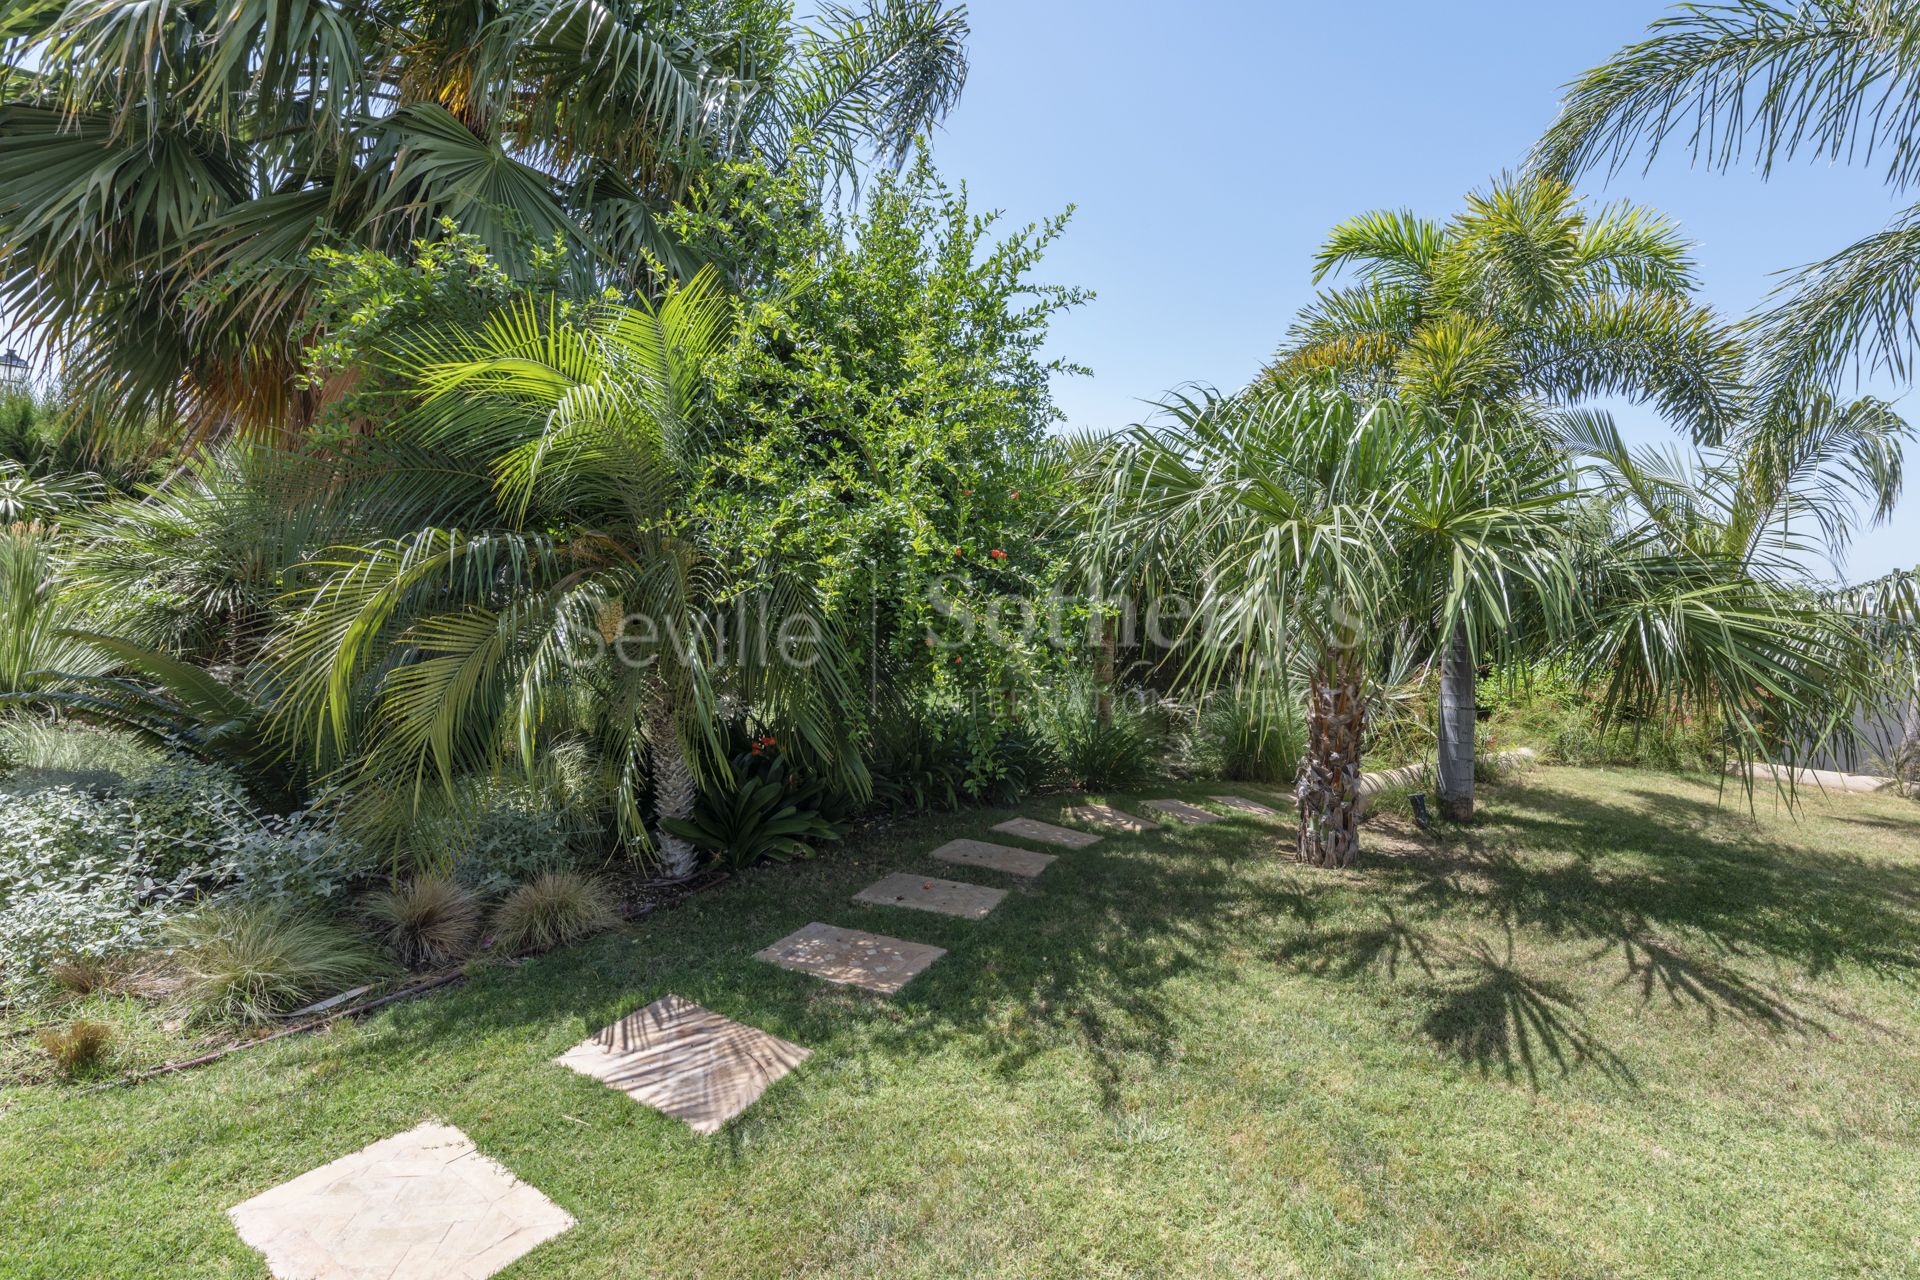 Super exclusive house with Hamman and Guest House. A natural oasis in Seville.